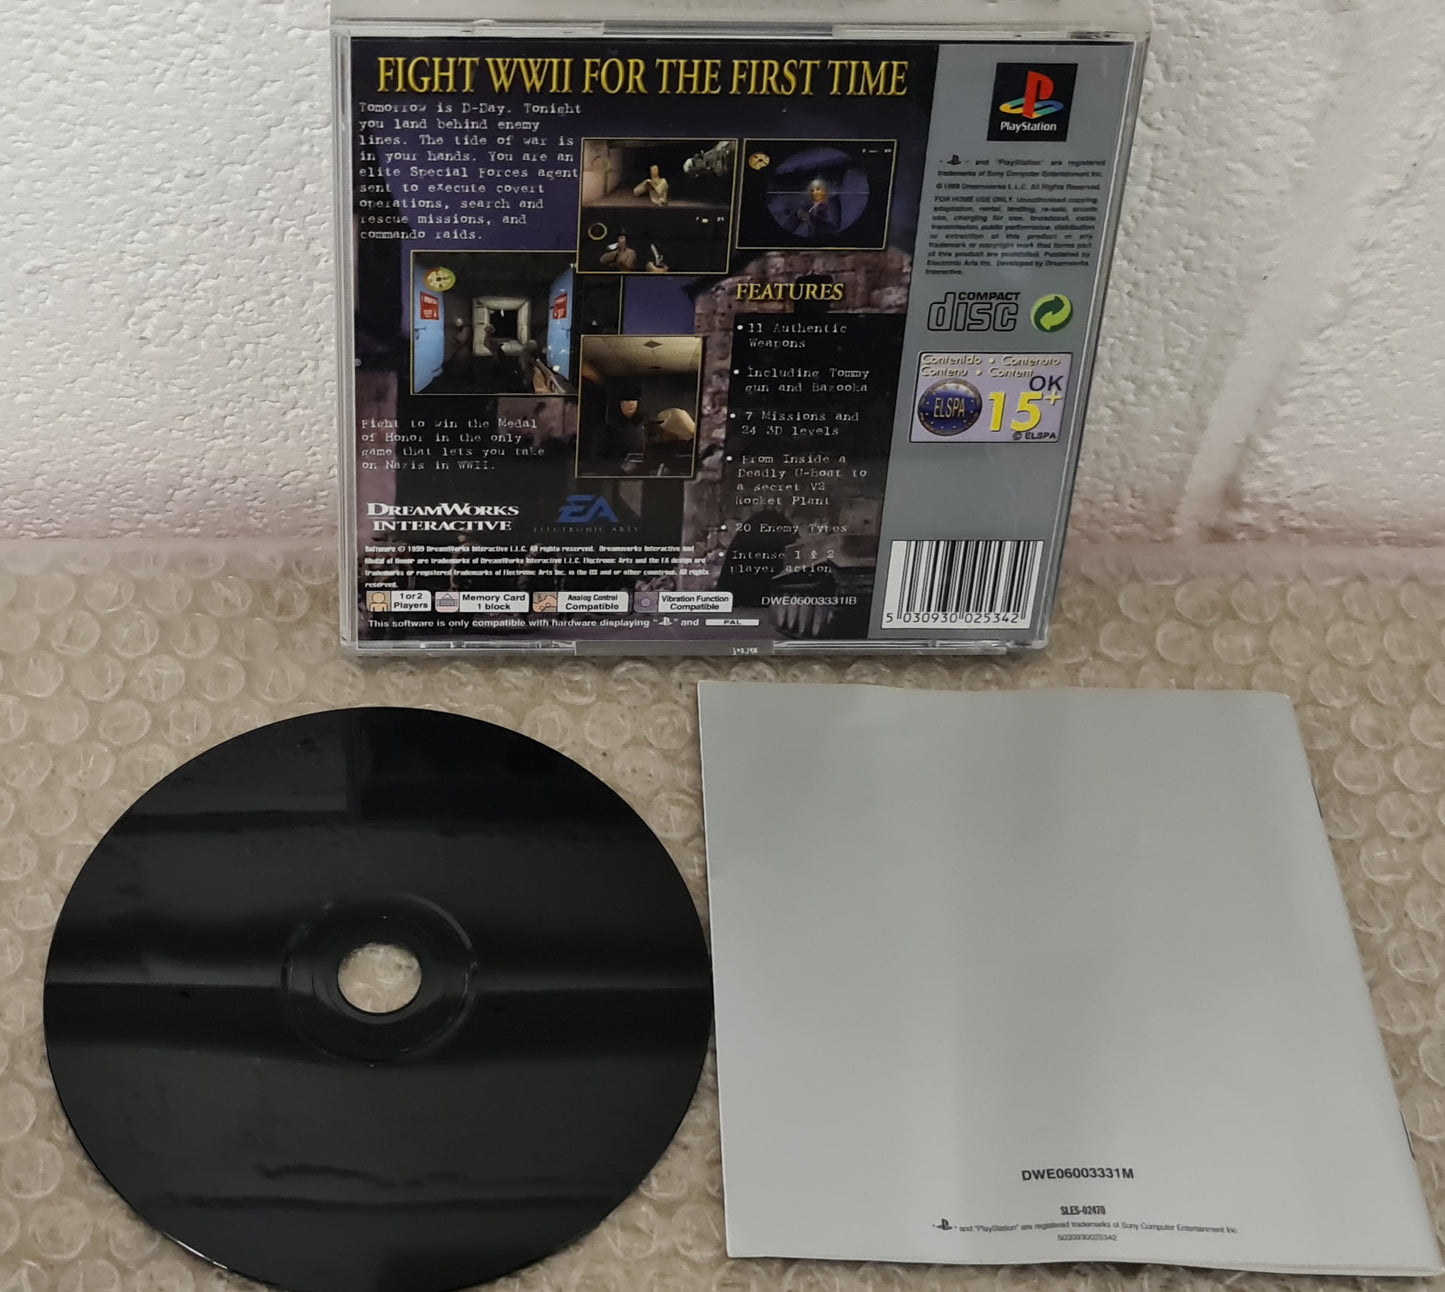 Medal of Honor Platinum Sony Playstation 1 (PS1) Game